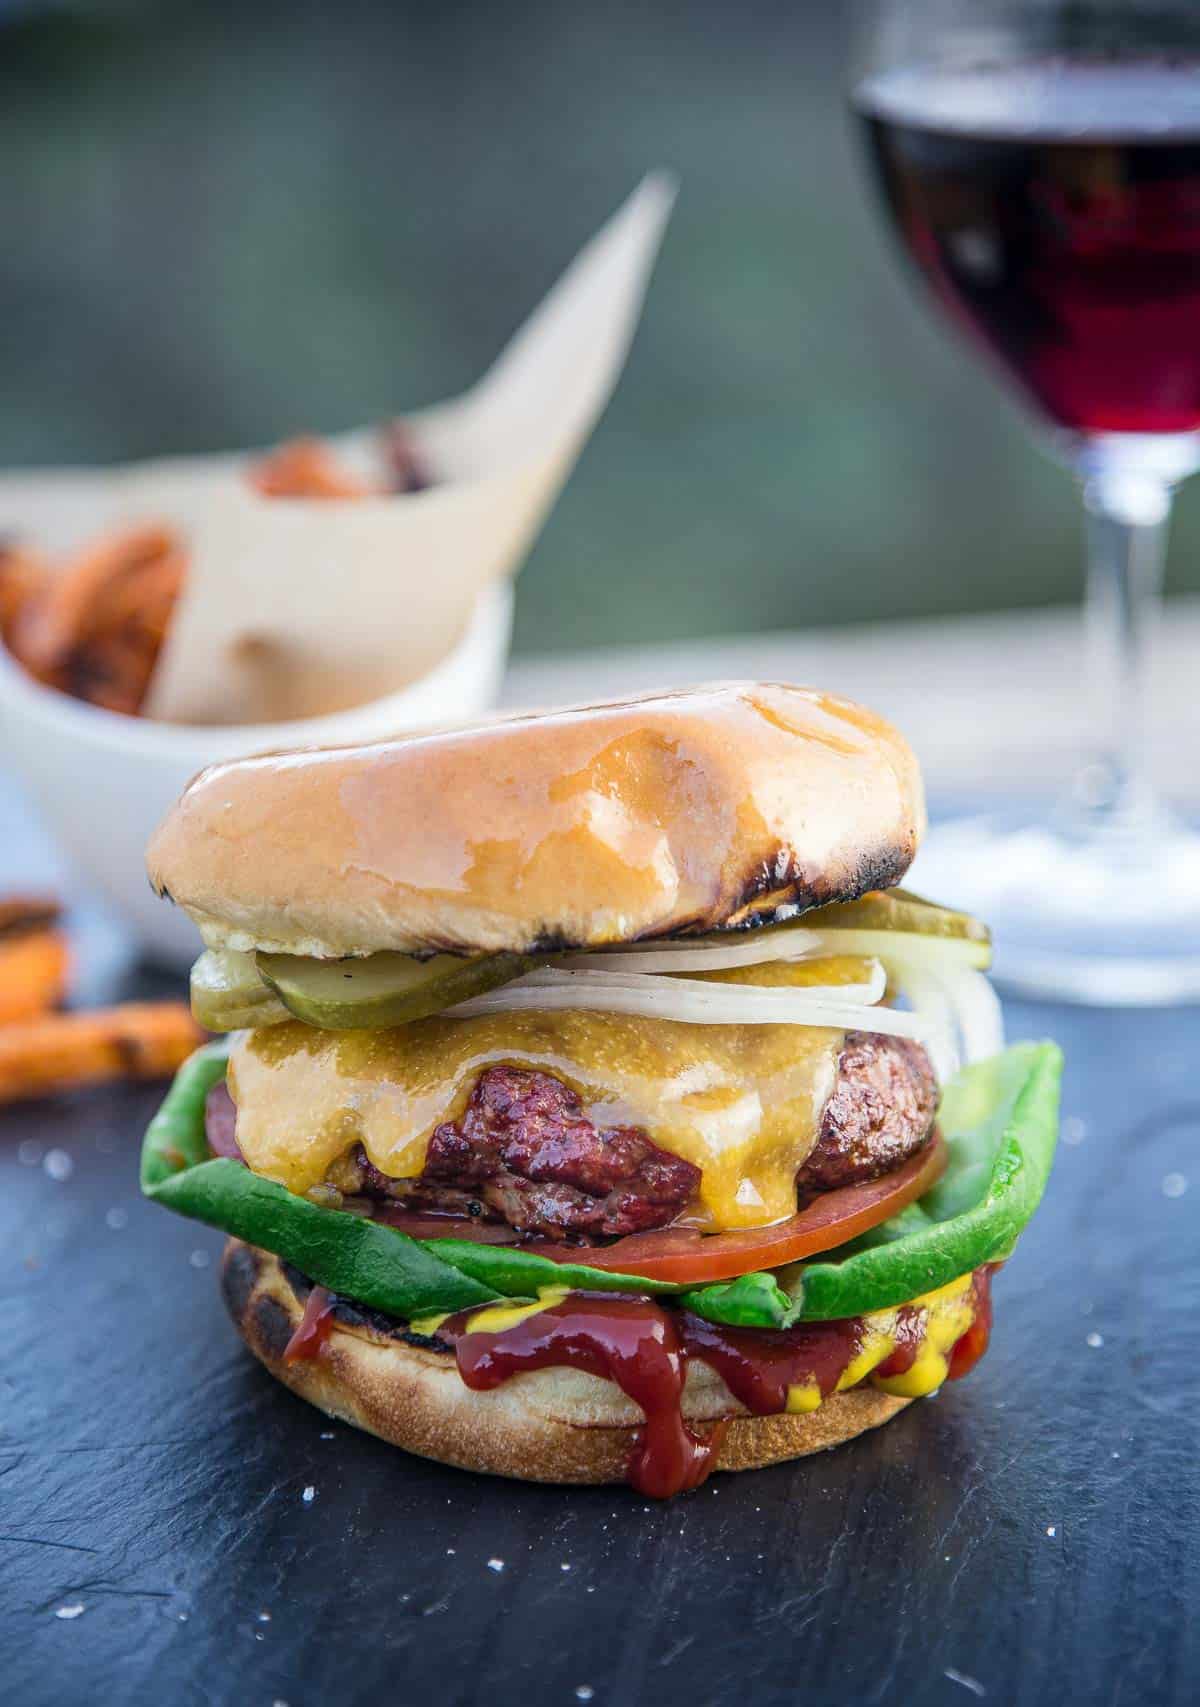 A classic All American Cheeseburger on a serving platter with a glass of wine and fries